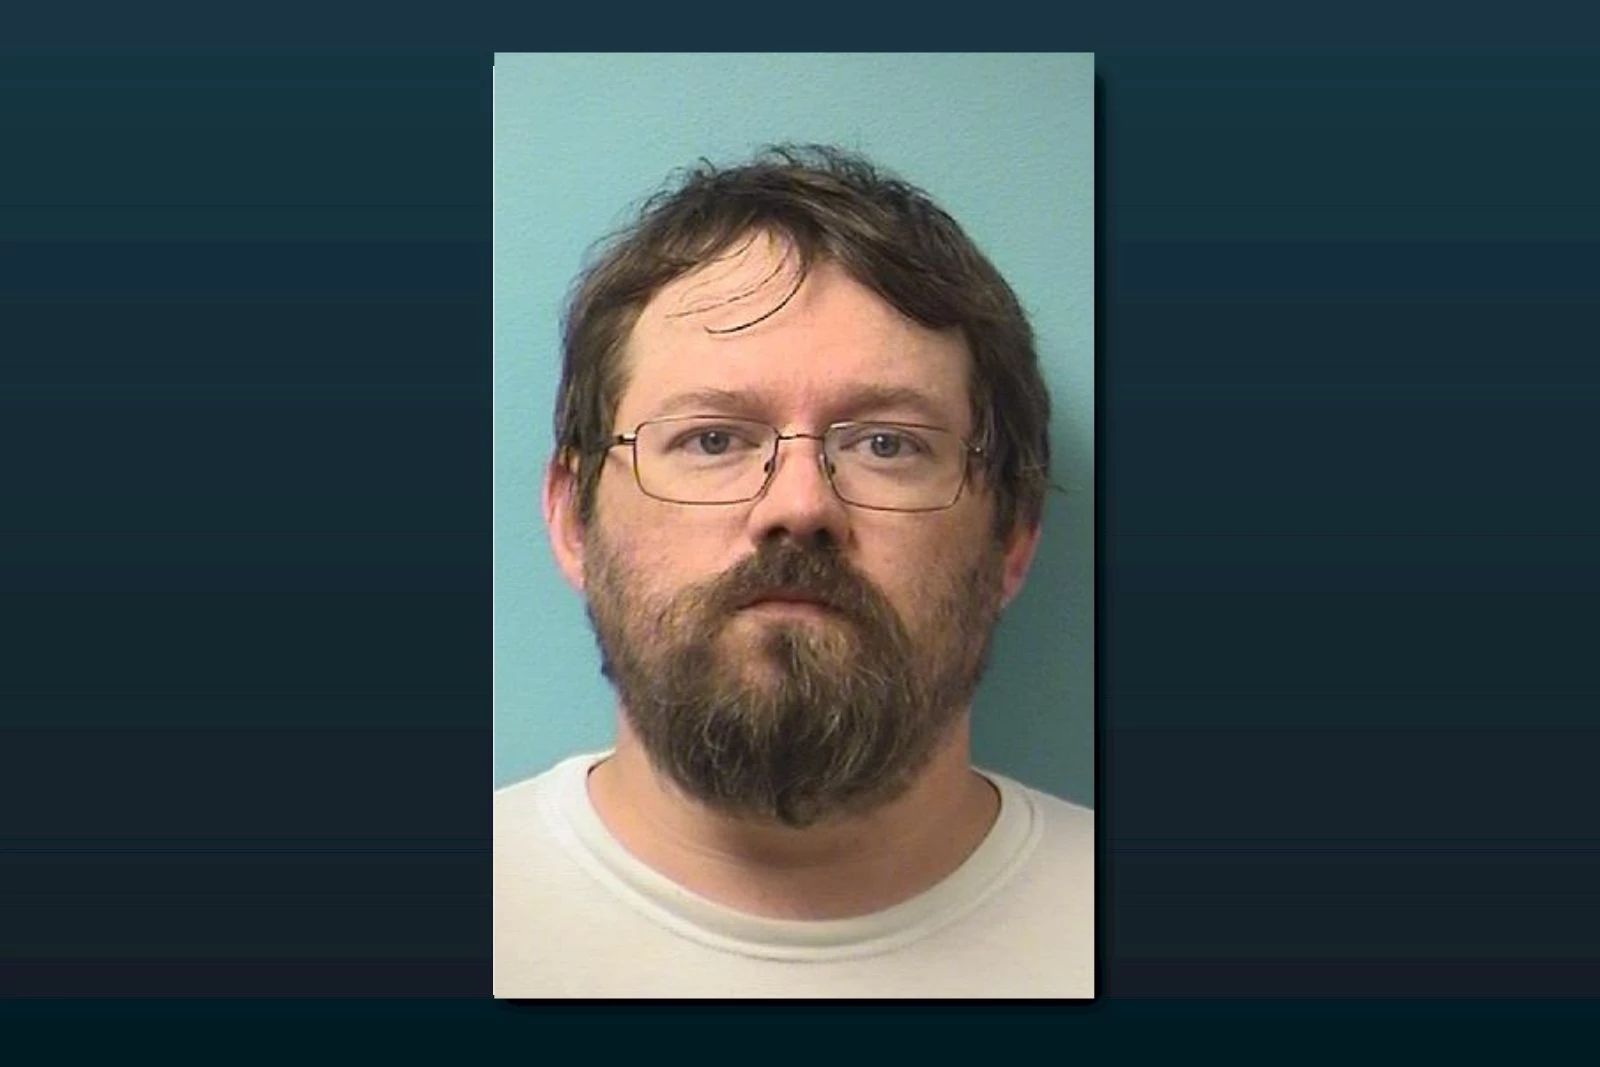 Waseca Man Pleads Guilty After Child Sex Sting in Stearns County